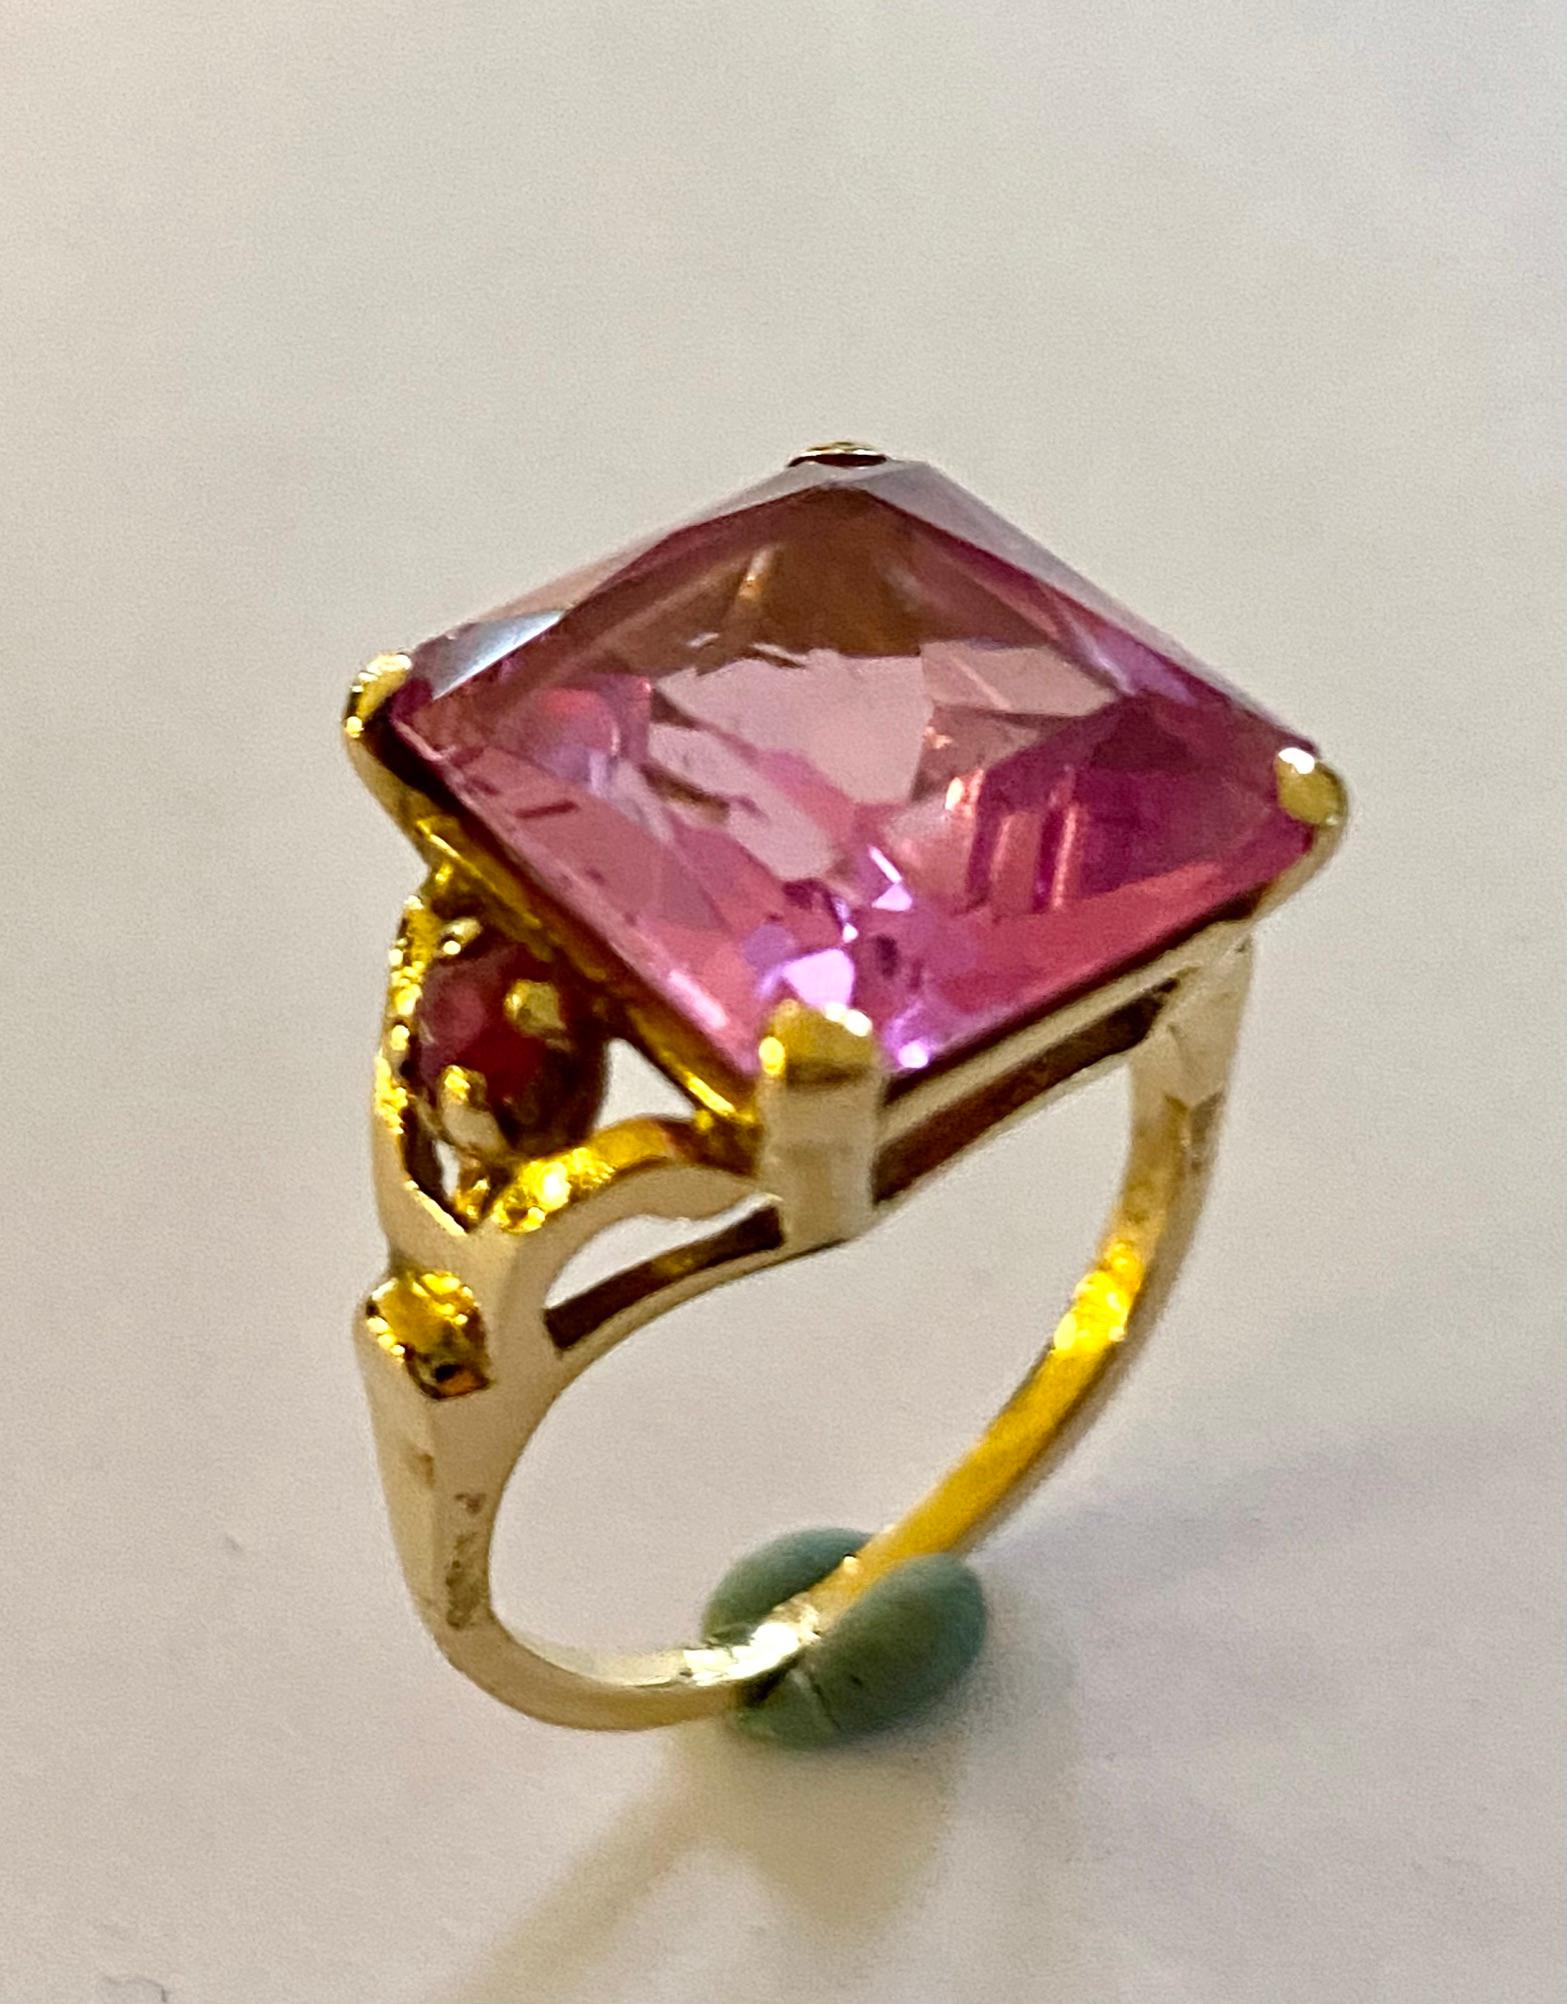 One (1) 14K. yellow gold gemstone ring.
A center stone: 12.00 ct Synthetic Pink Sapphire 13.93 x 11.91 x 6.79 mm
2 side stones: 0.24 ct. Synthetic Ruby, round
size of the ring: 16.25 (51+) USA 5.75 UK: K +
Weight of the ring: 6.64 grams
Stamped 585